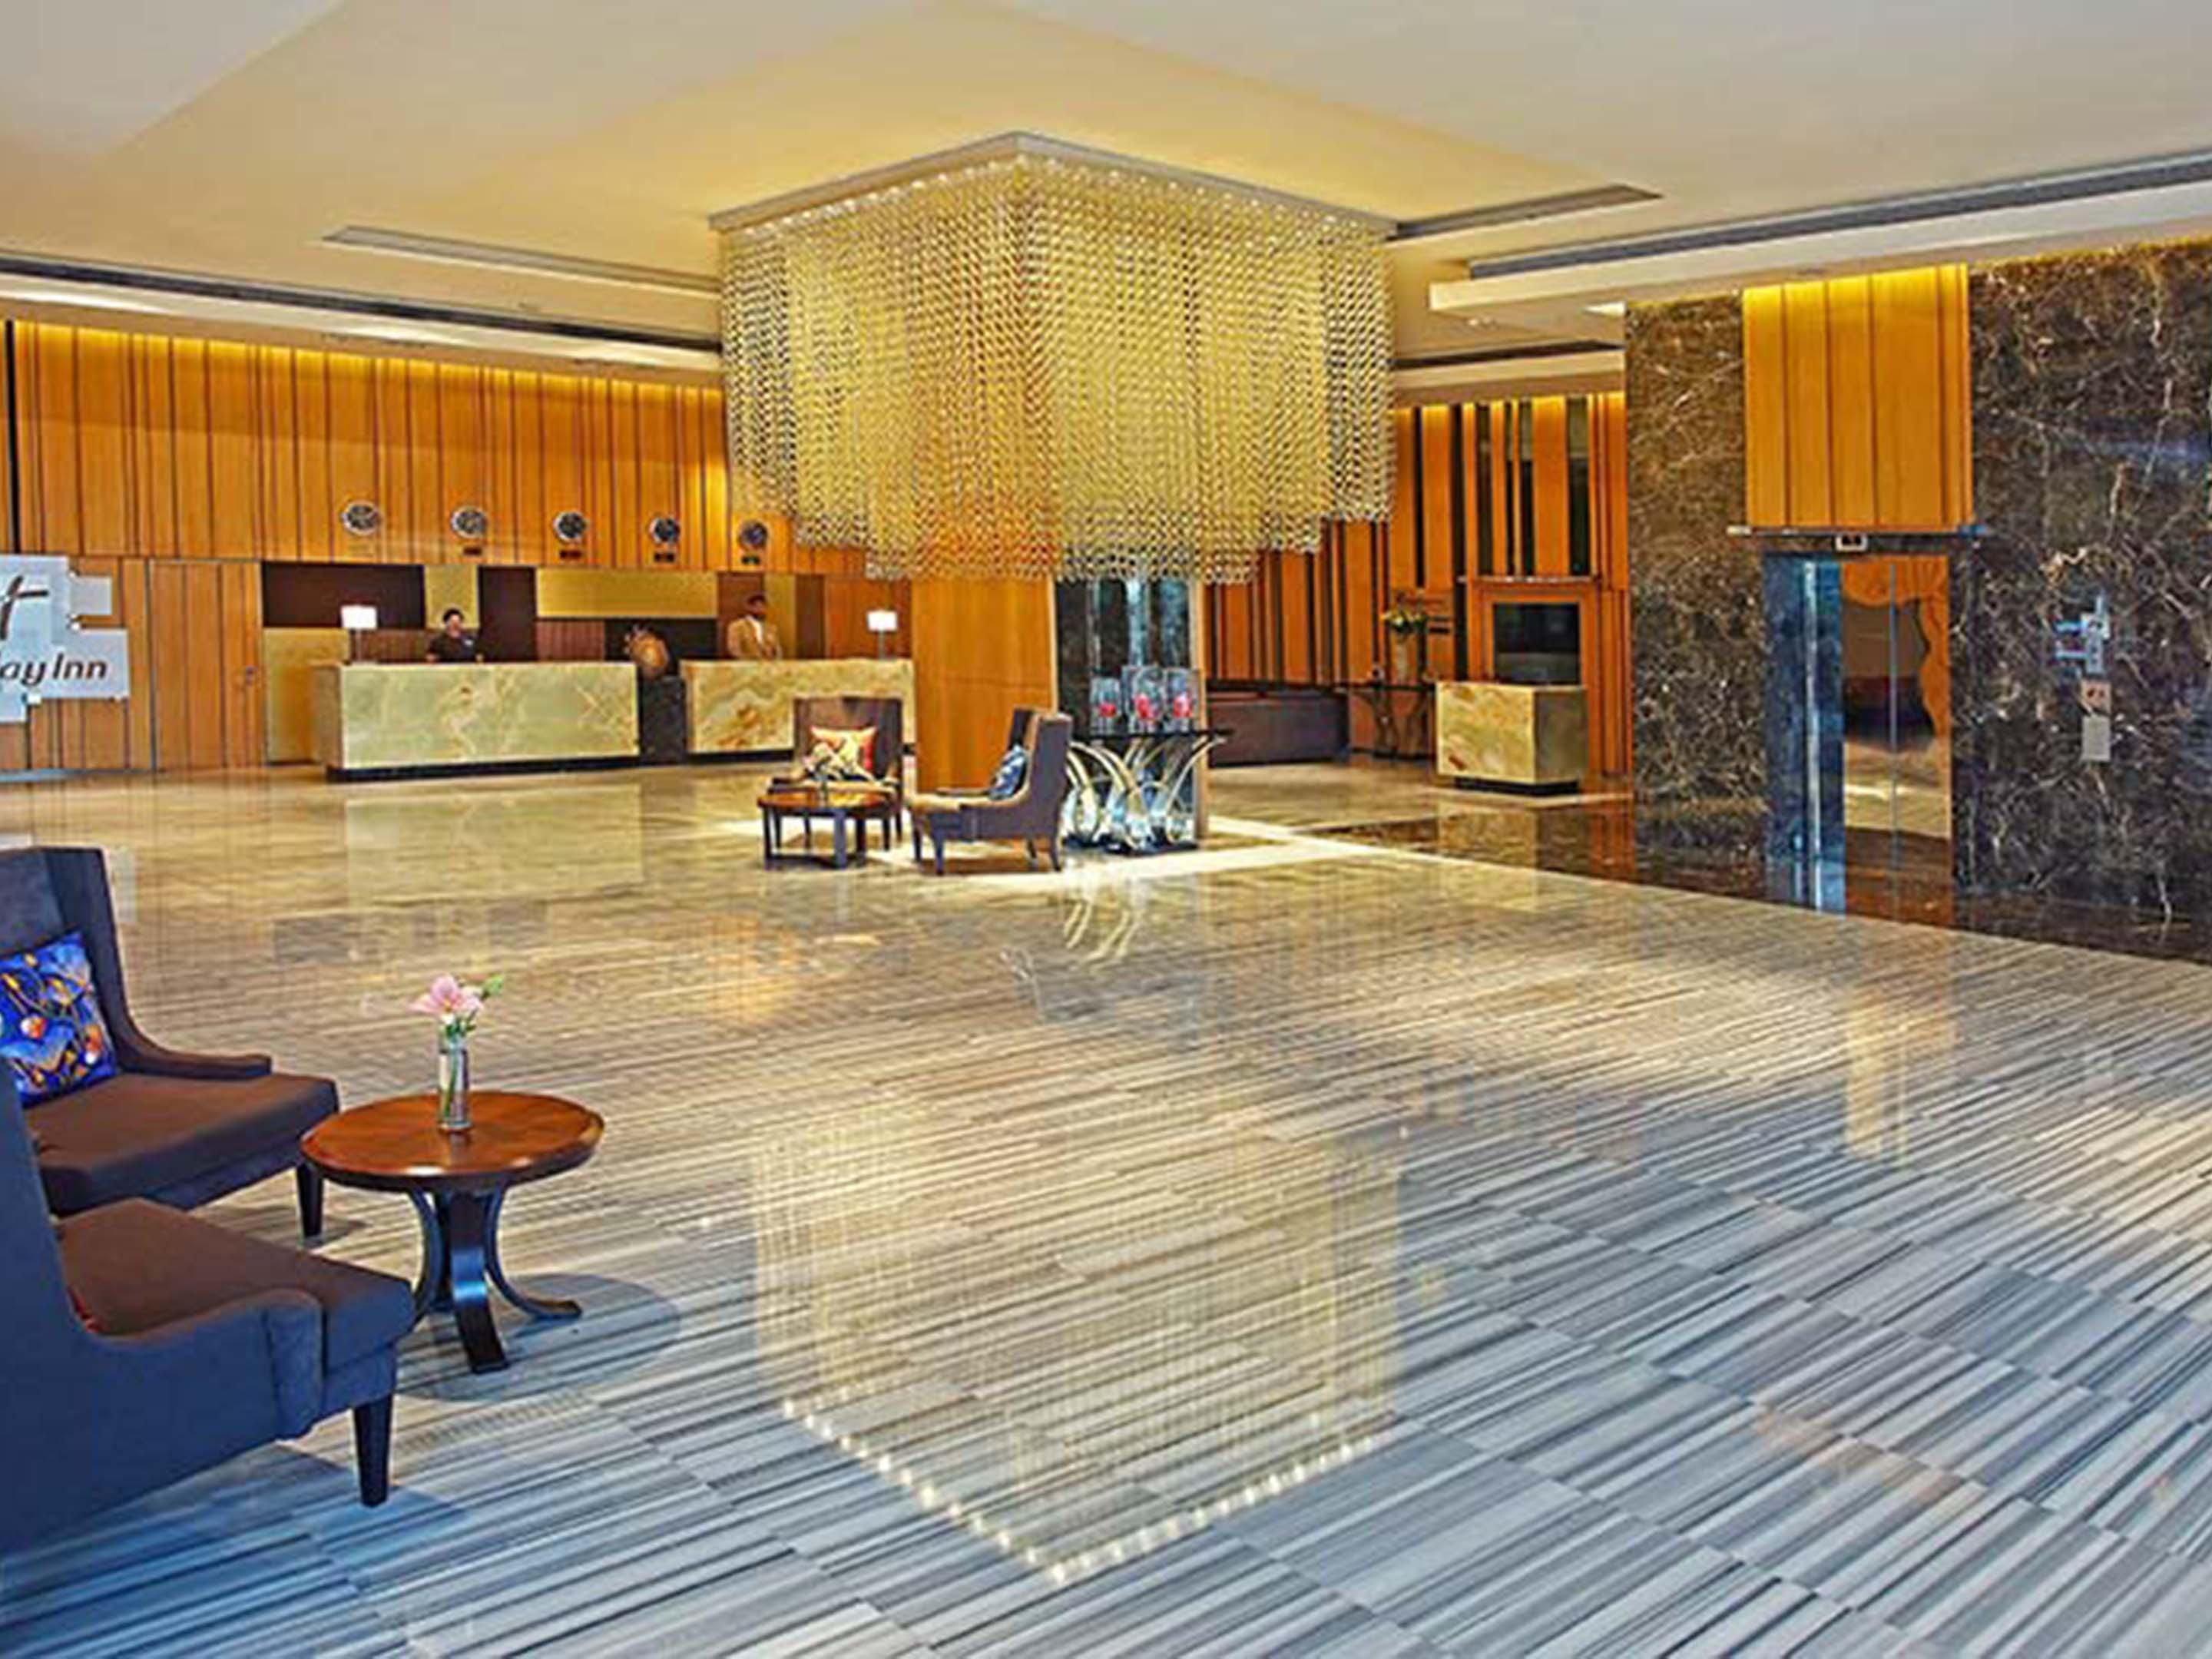 Find New Delhi Hotels Top 10 Hotels In New Delhi India By IHG